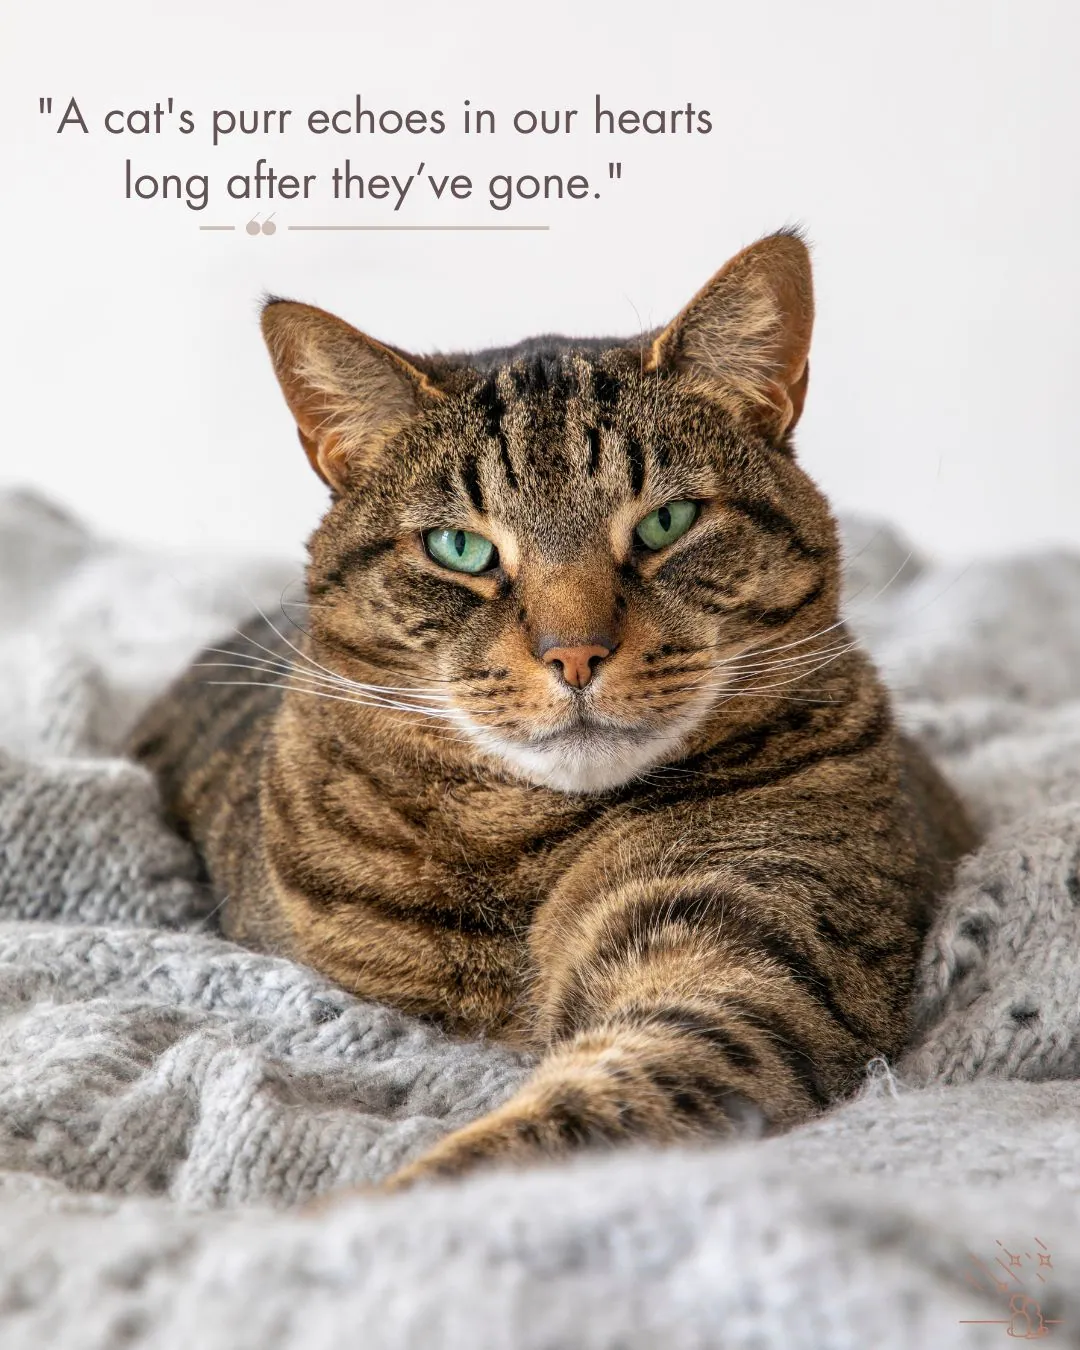 Pet Loss Quotes for Cat Image (1)